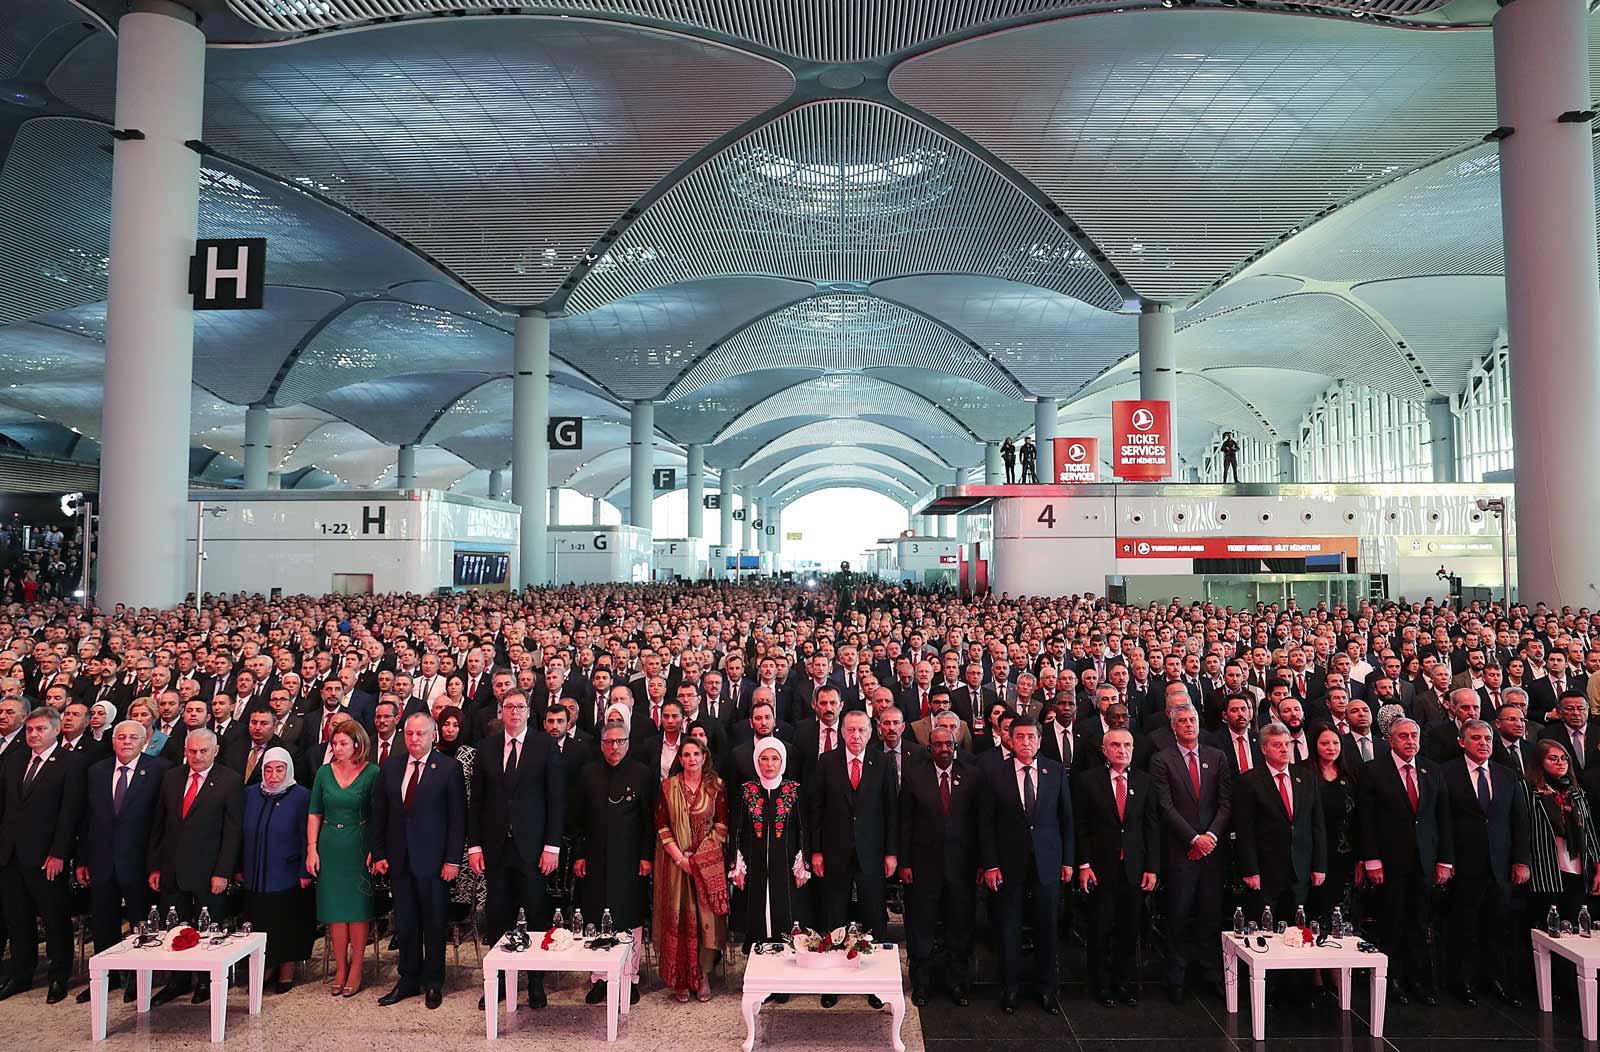 Turkish President Recep Tayyip Erdoğan with his wife Emine Erdoğan, and the presidents of Serbia, Moldova, Kyrgyzstan, Sudan, and Kosovo at the opening ceremony of new airport in Istanbul, October 29, 2018